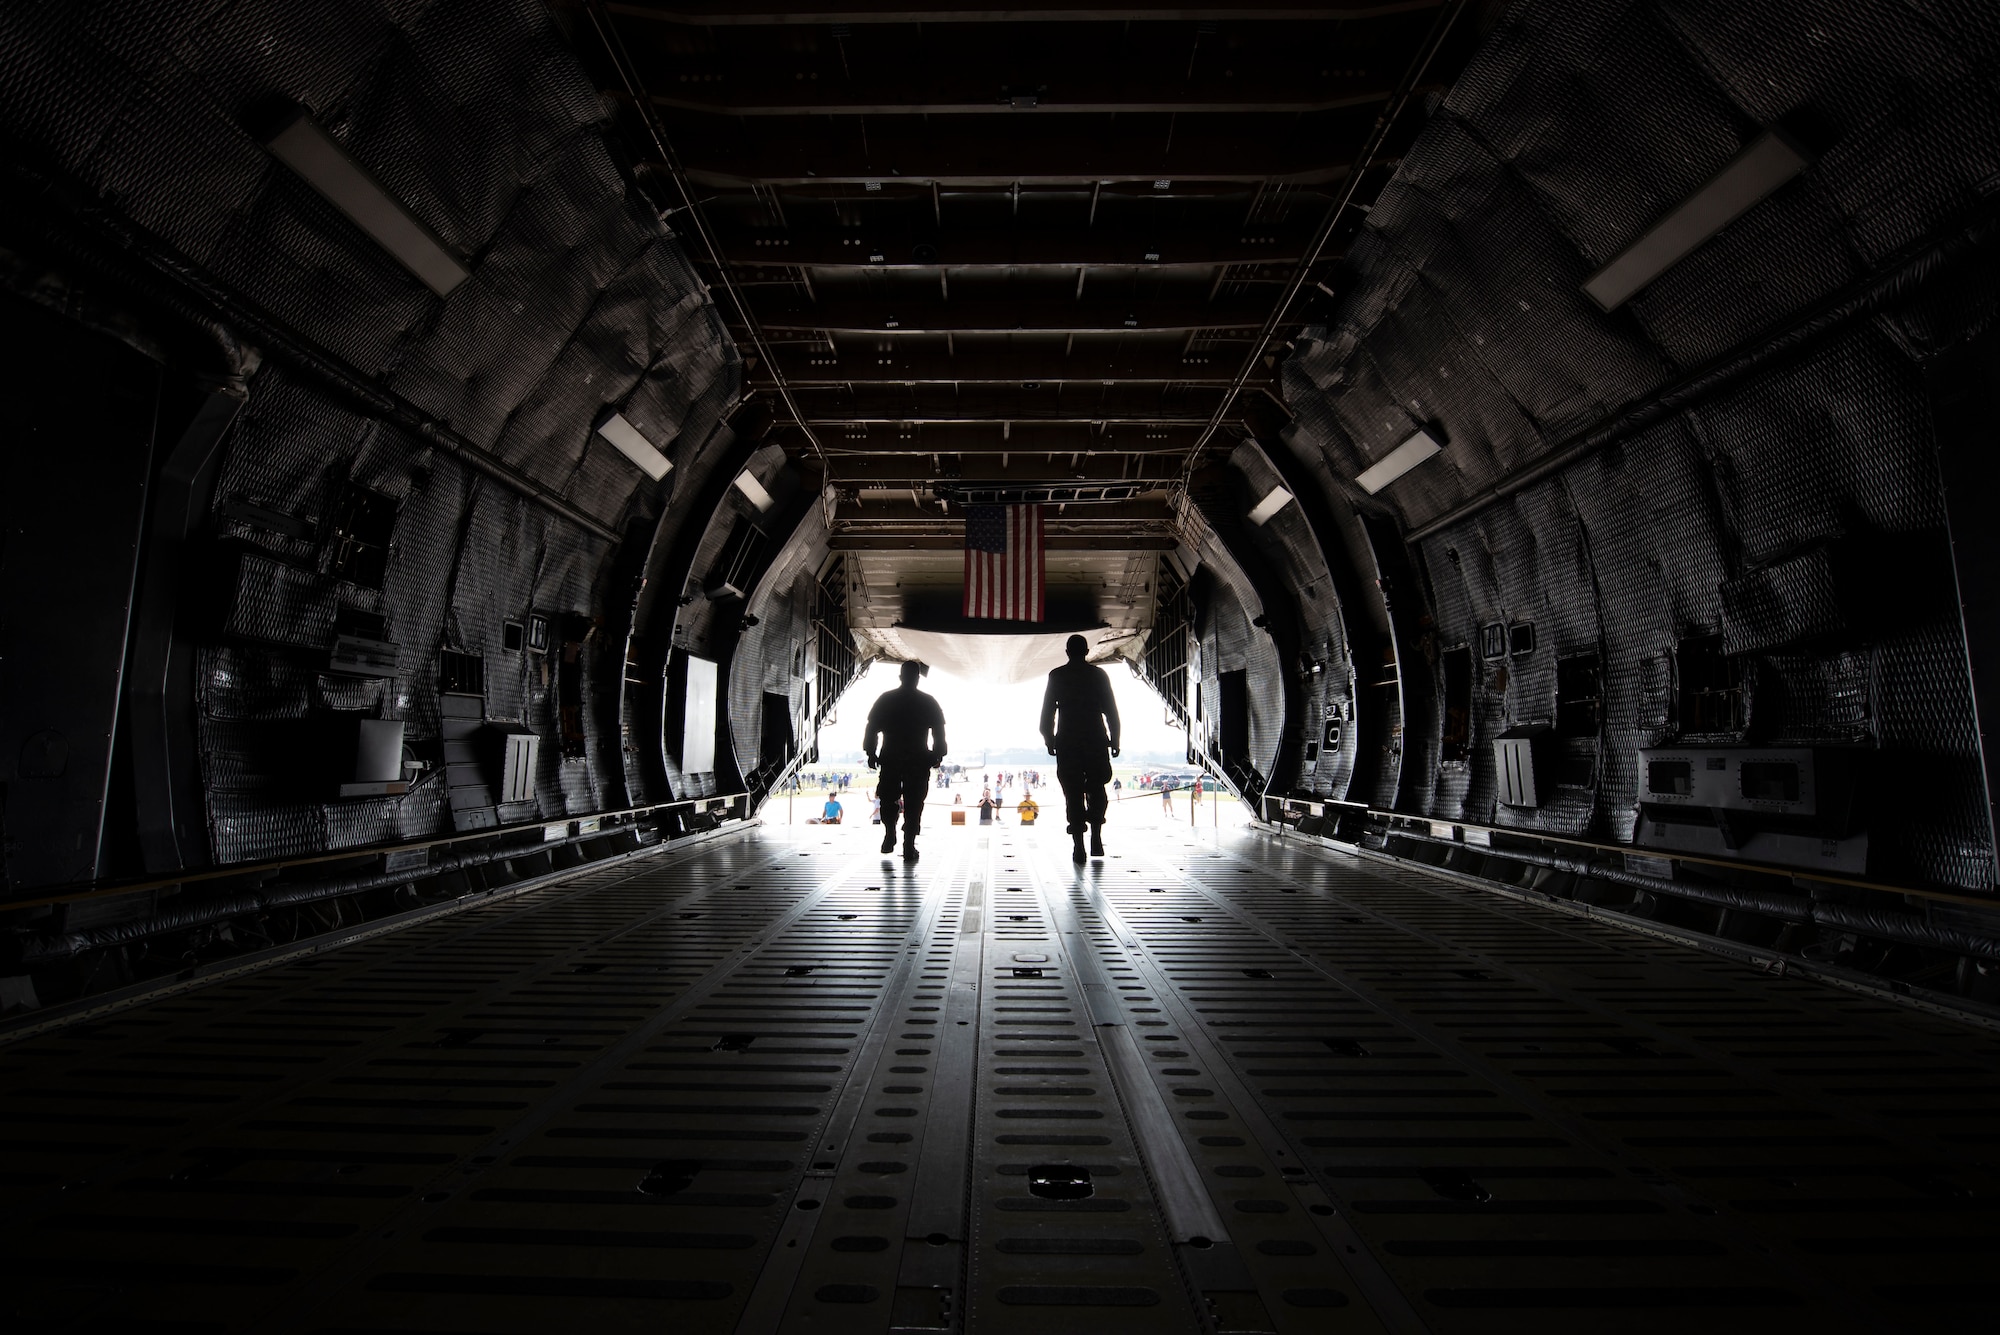 U.S. Air Force Tech. Sgt. Audy Cayanan, 60th Aerial Port Squadron transportation craftsman, left, and Senior Airman Marcus Bueno, 60th APS transportation journeyman, walk toward an exit on a C-5M Super Galaxy July 27, 2019, at Wittman Regional Airport in Oshkosh, Wisconsin. The C-5 crew went to EAA AirVenture 2019 where more than 500,000 aviation enthusiasts from 80 countries gathered at the air show to celebrate the past, present and future in the world of aviation. (U.S. Air Force photo by Senior Airman Jonathon Carnell)